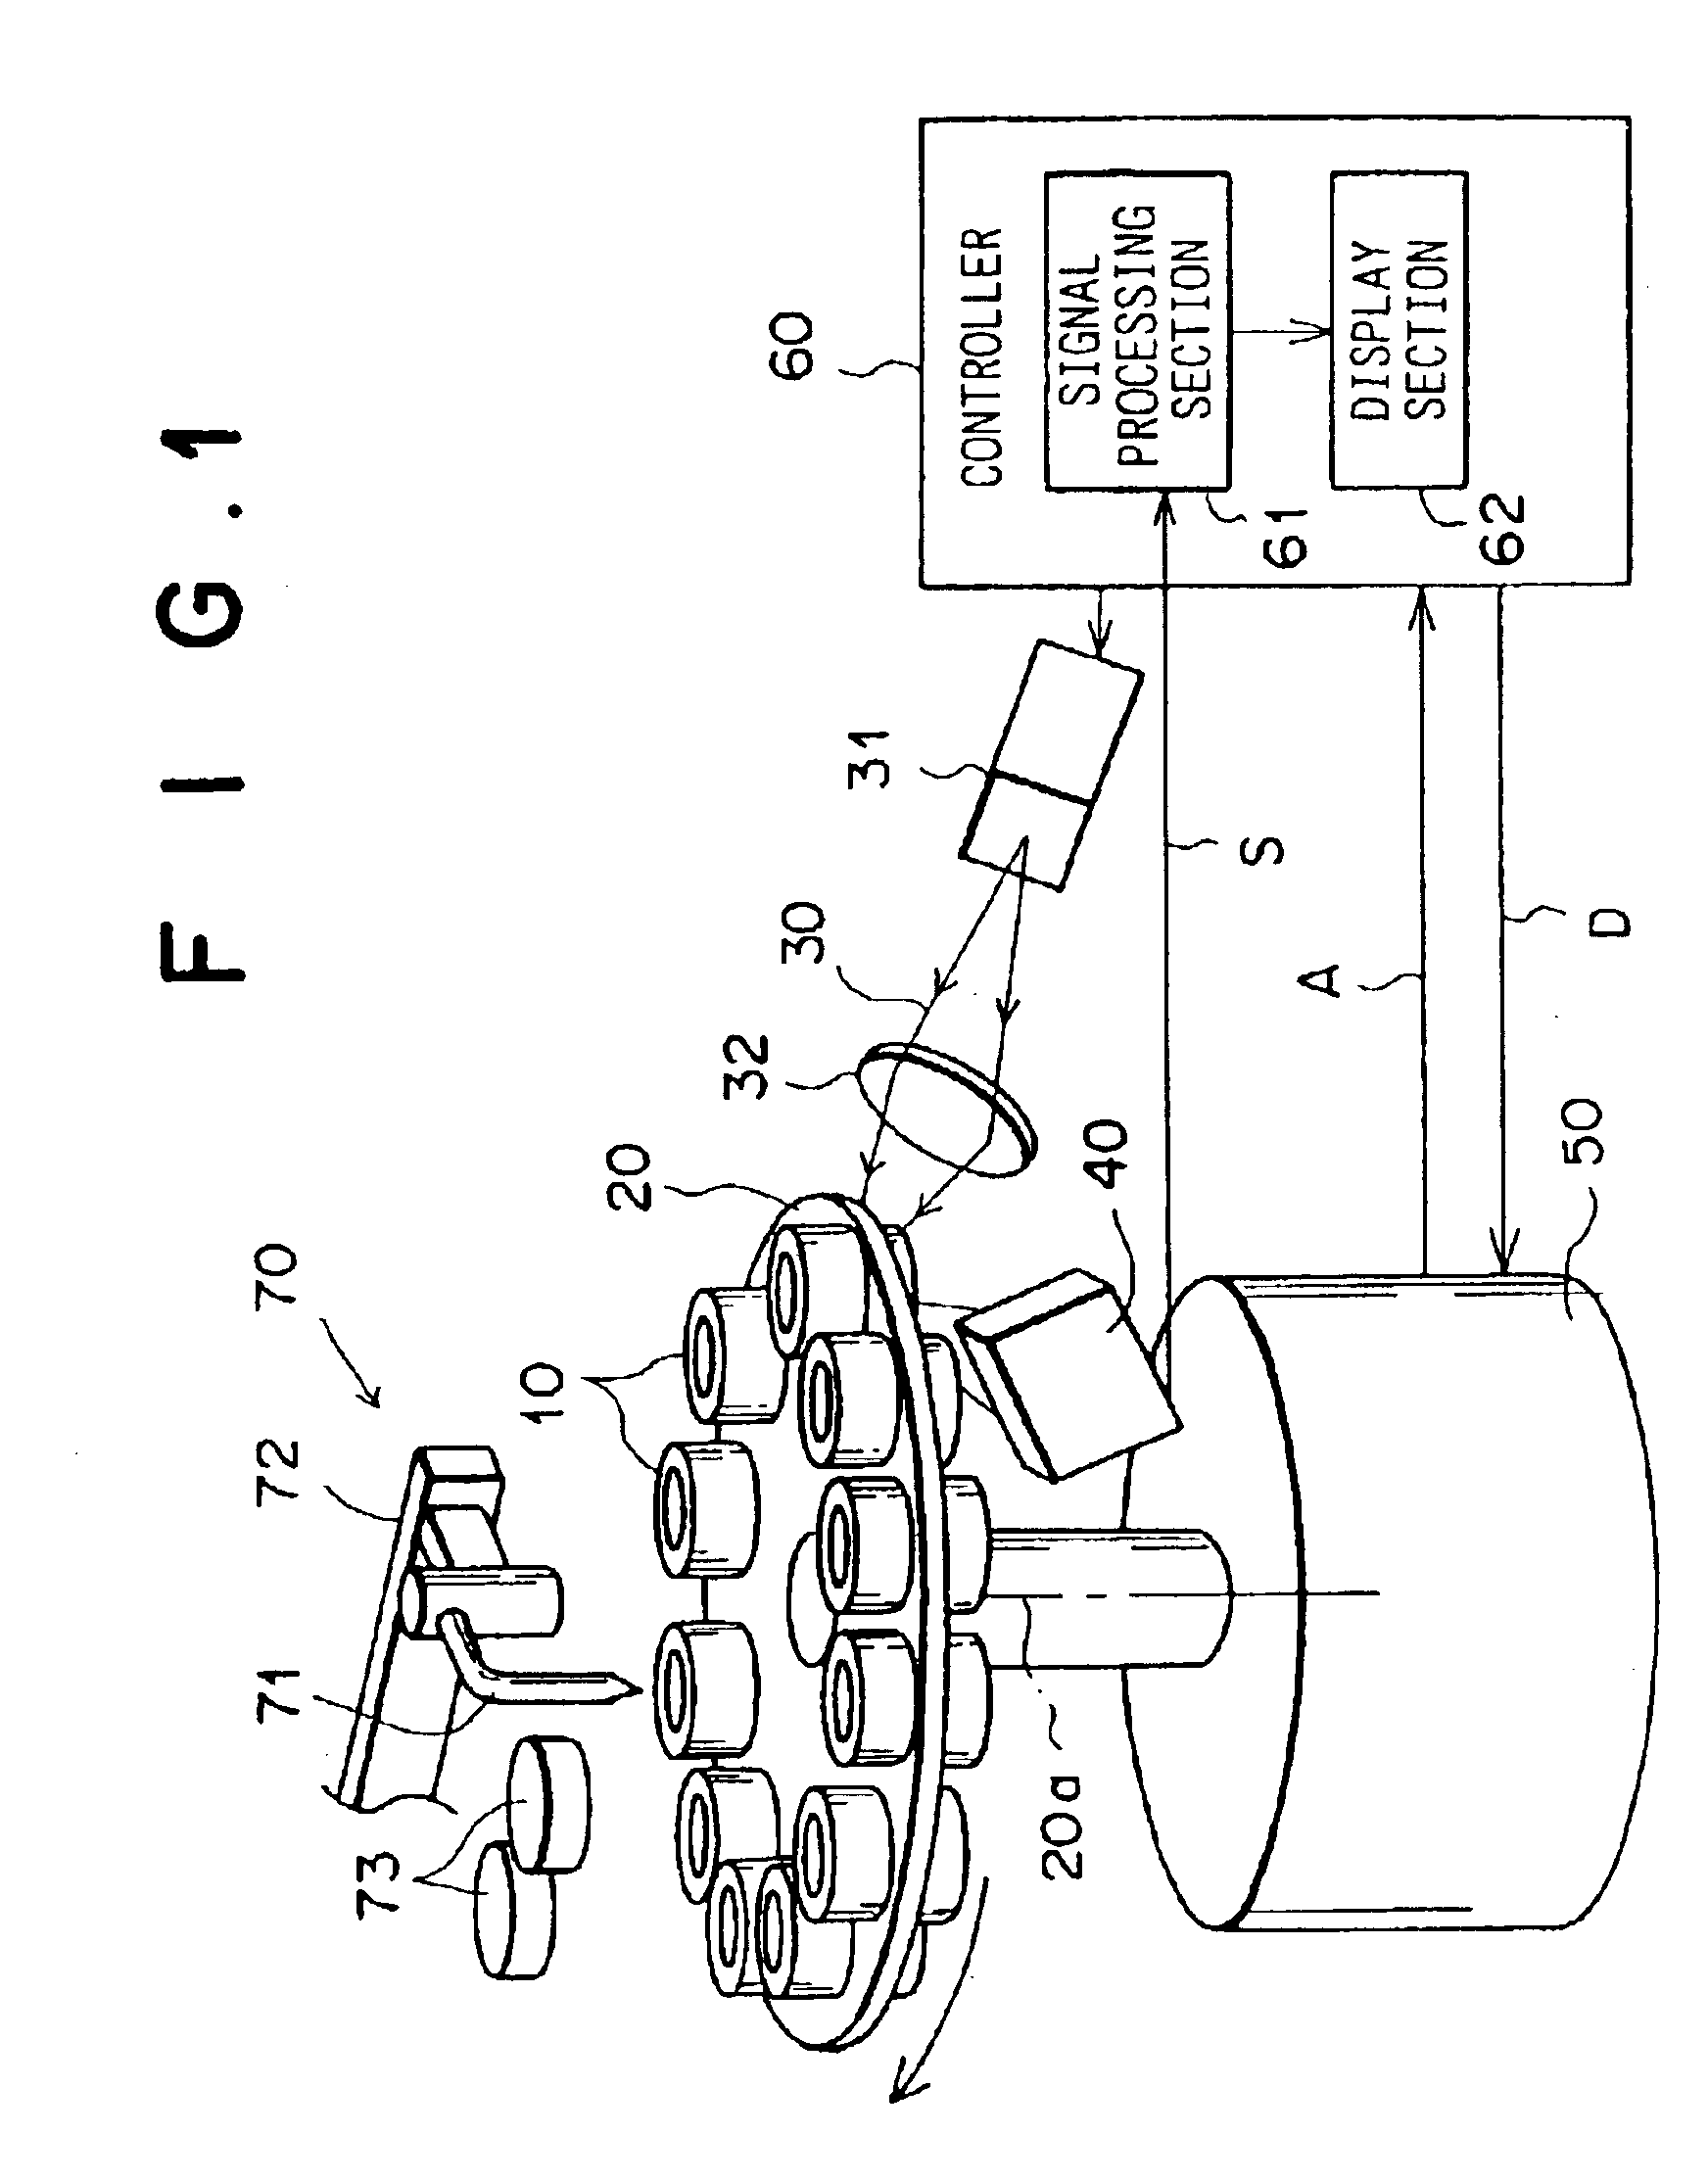 Measuring method and apparatus using attenuation in total reflection